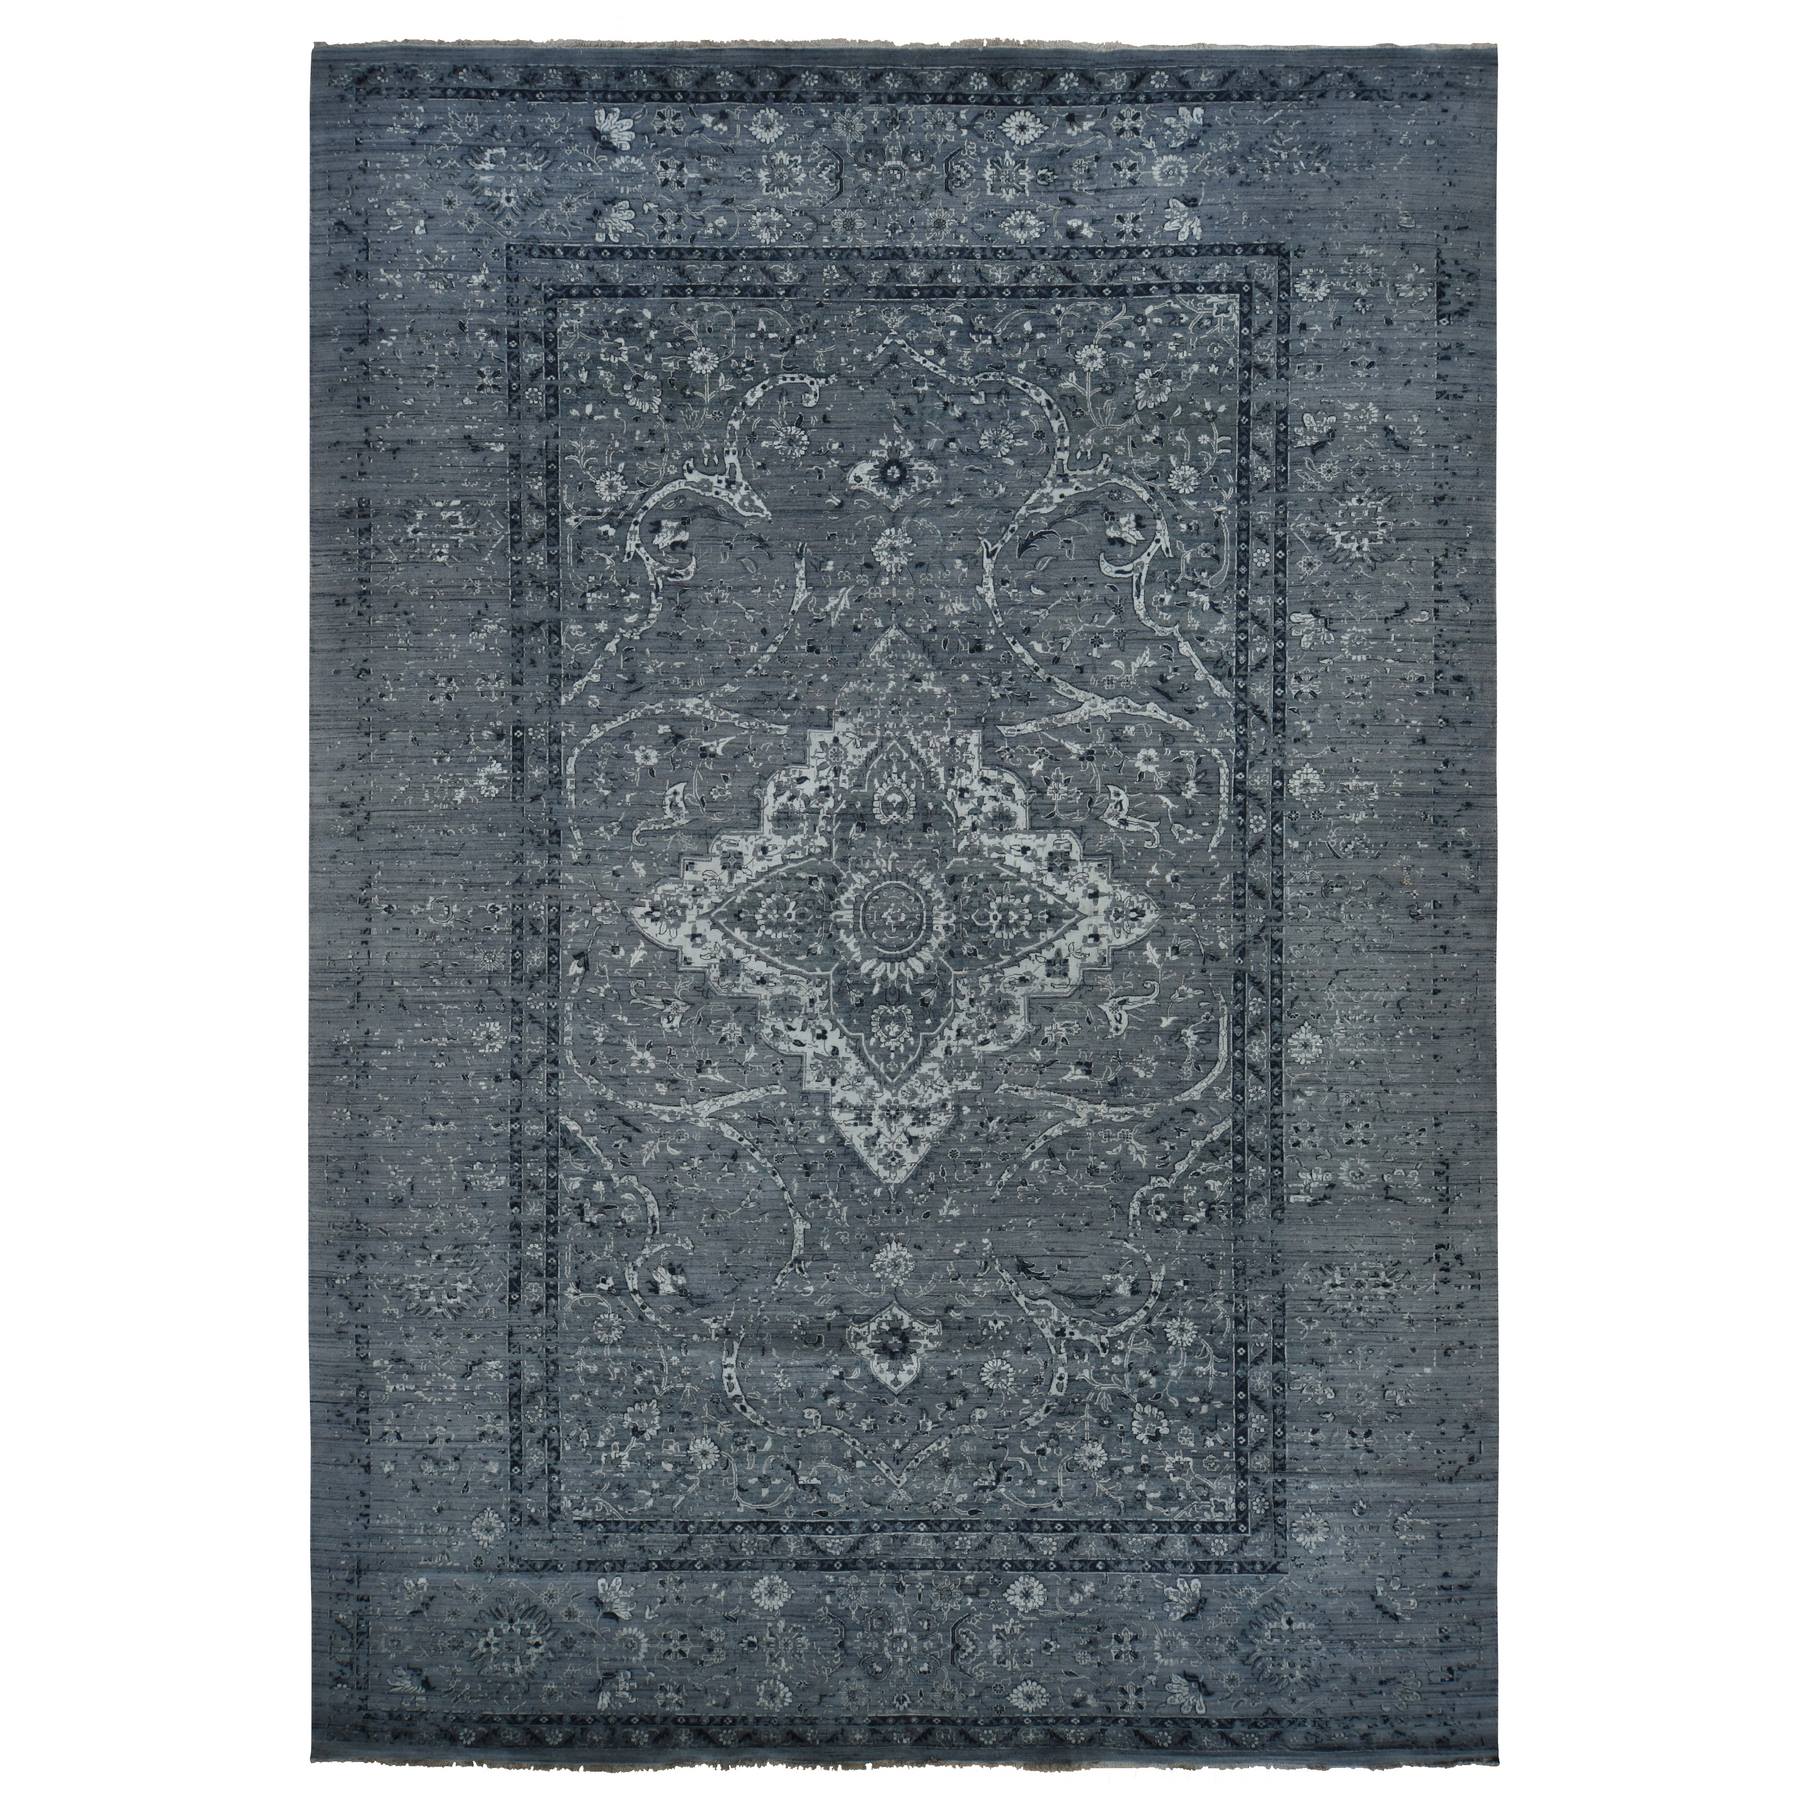  Silk Hand-Knotted Area Rug 12'1